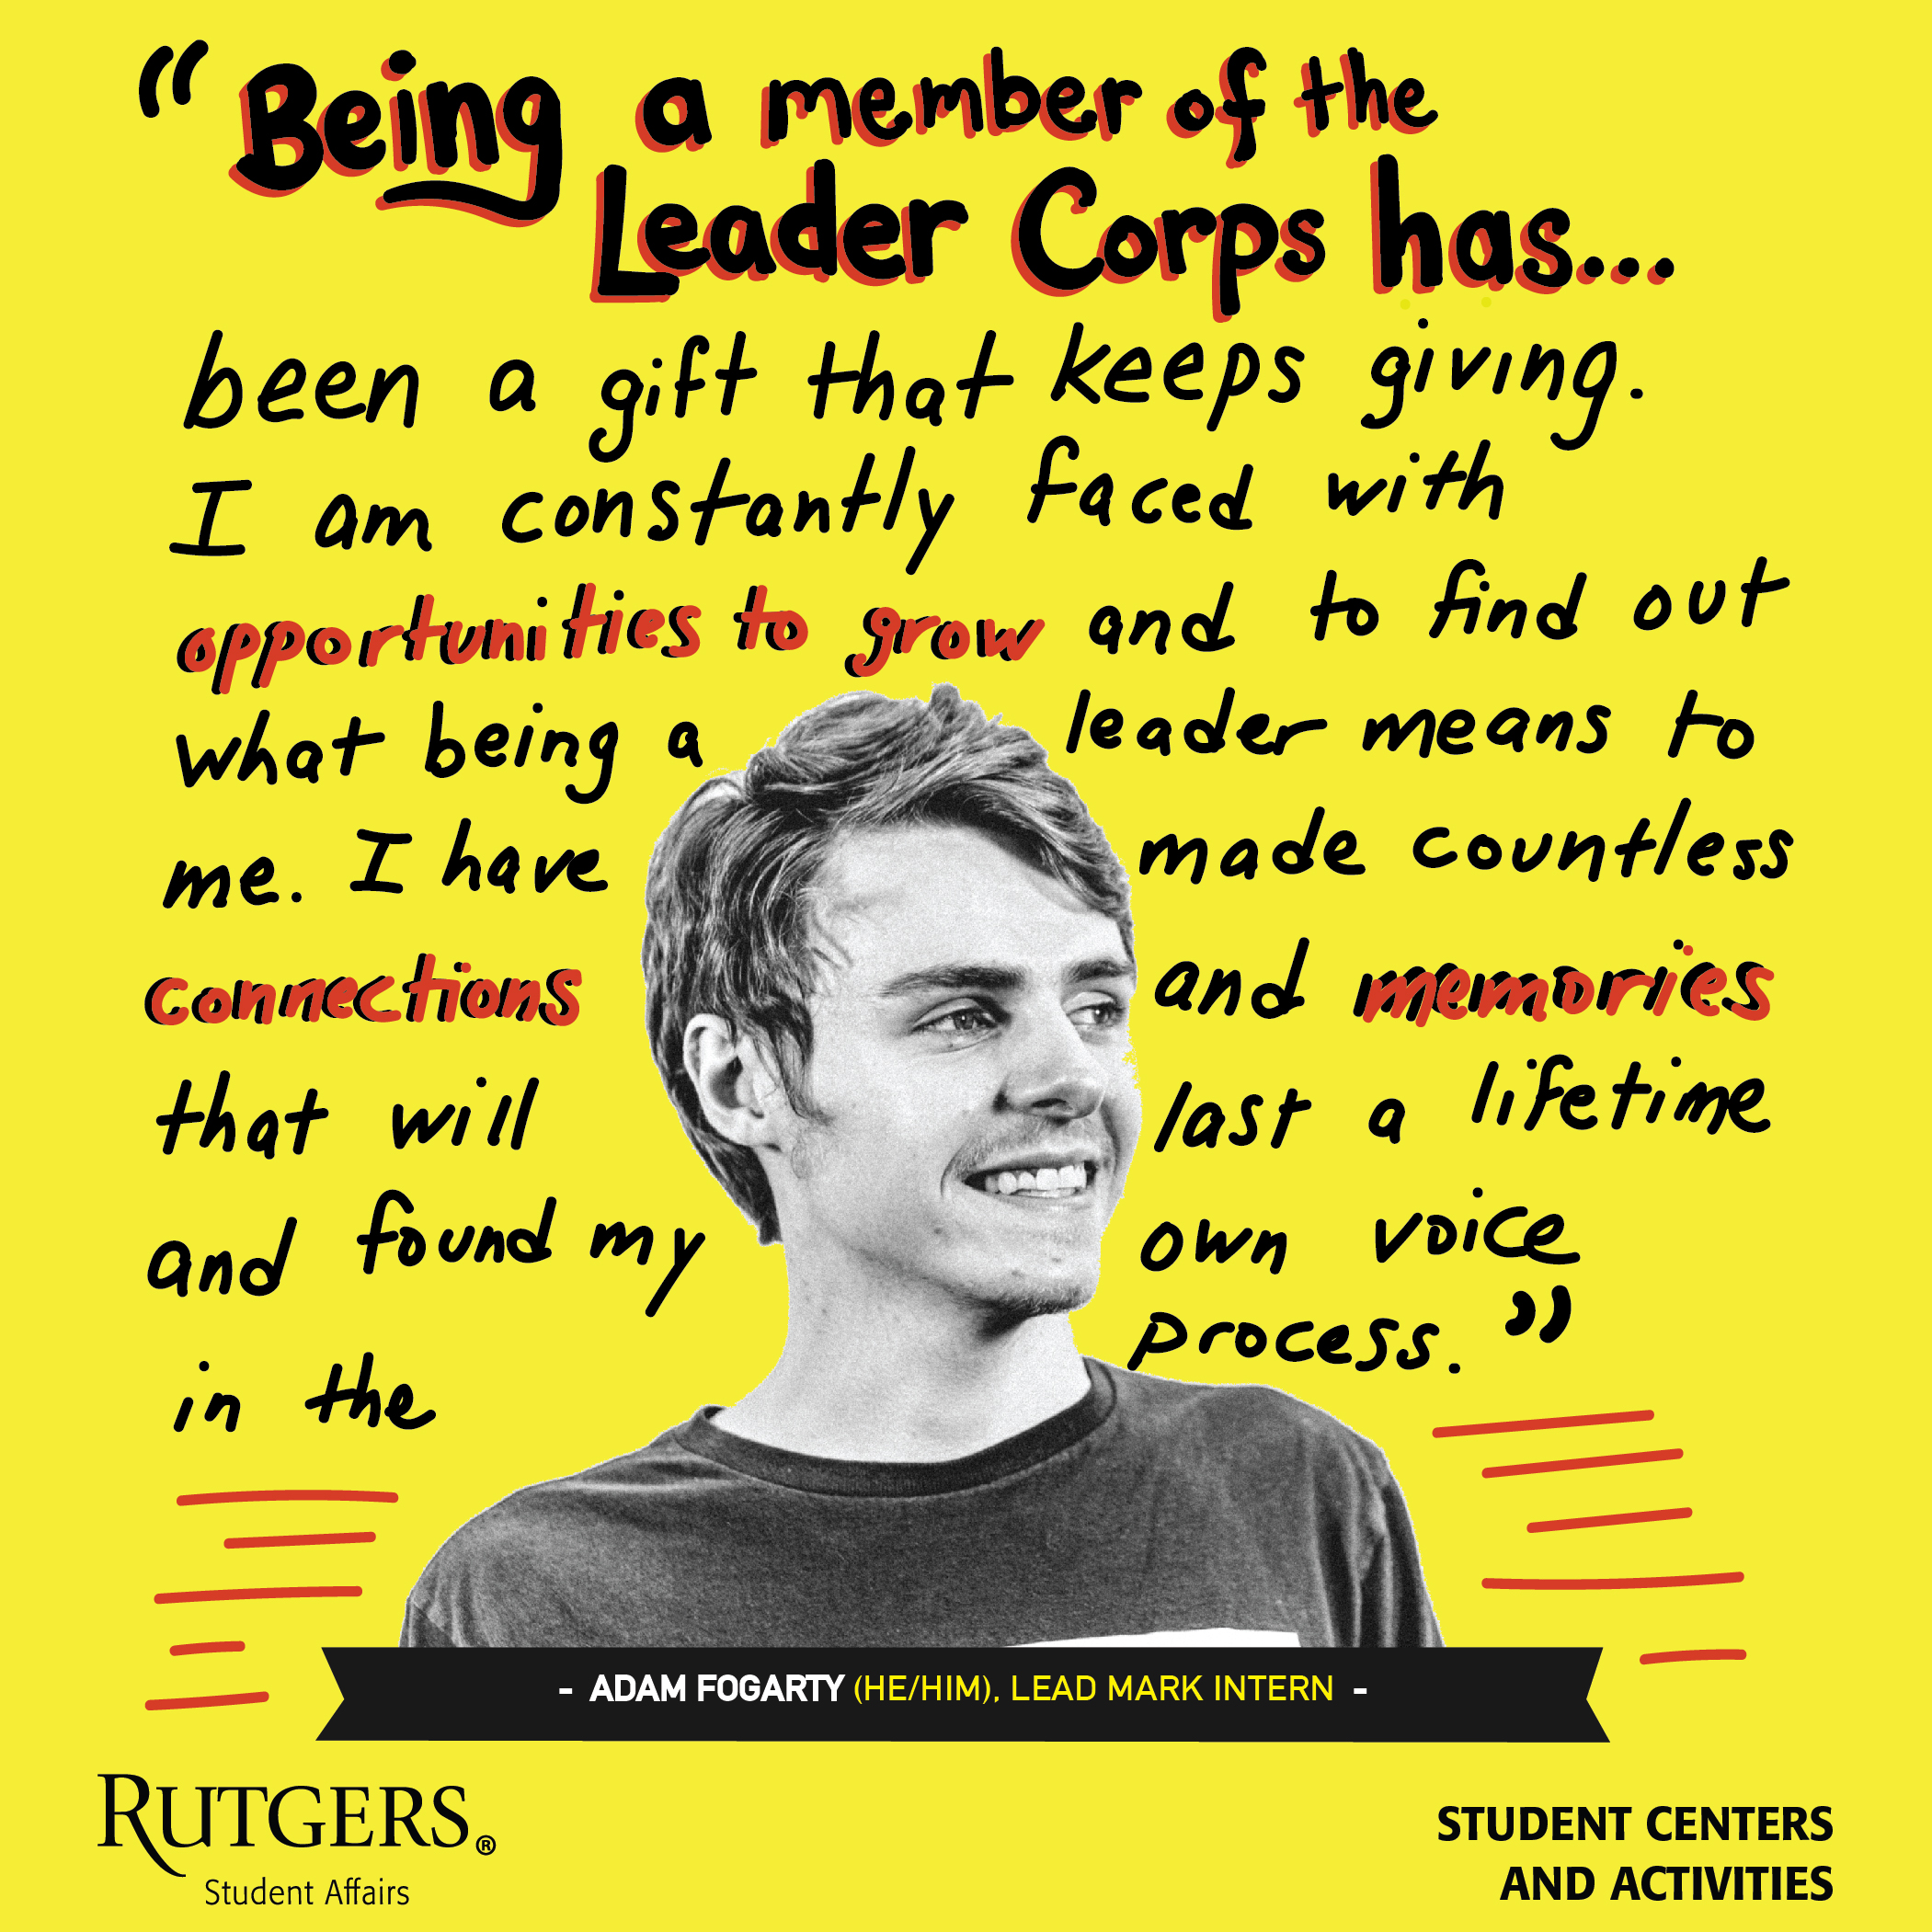 A quote by Adam Fogarty: "Being a member of the Leader Corps has been a gift that keeps giving. I am constantly faced with opportunities to grow and to find out what being a leader means to me. I have made countless connections and memories that will last a lifetime and found my own voice in the process."